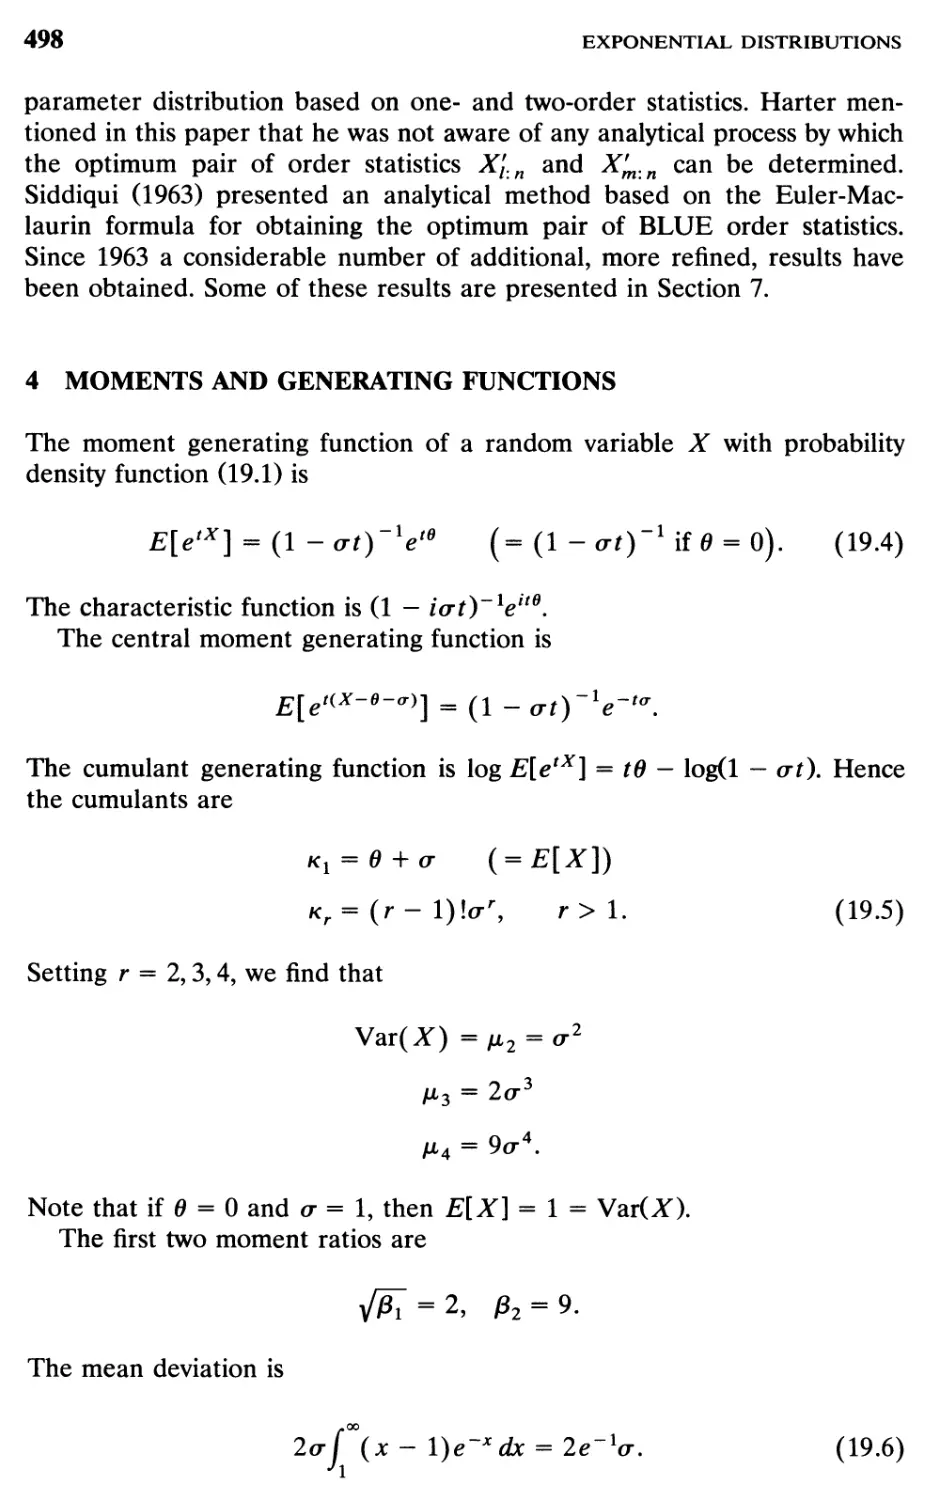 4 Moments and Generating Functions, 498